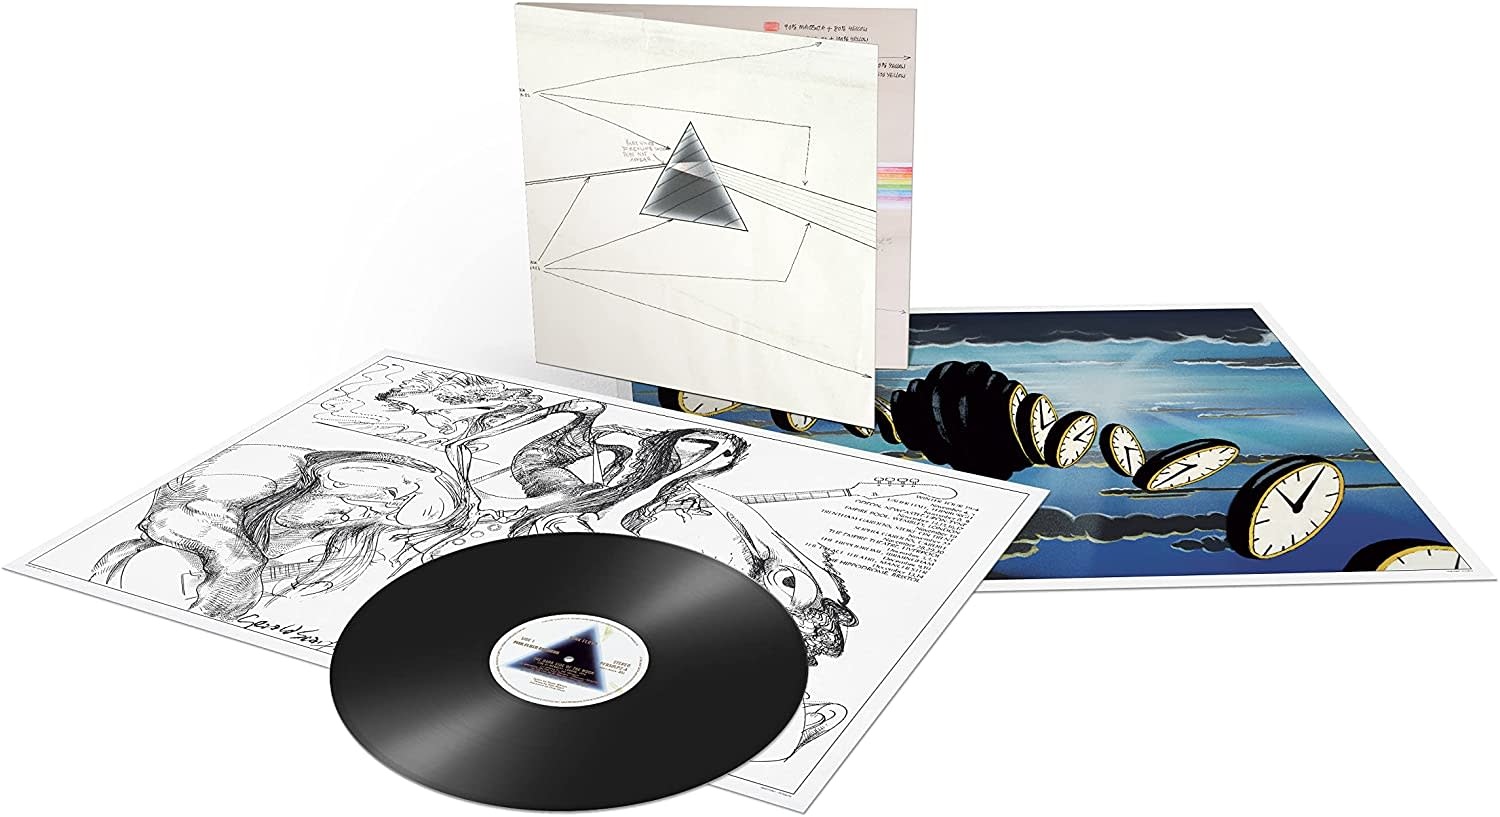 Pink Floyd – The Dark Side Of The Moon (Live At Wembley 1974)